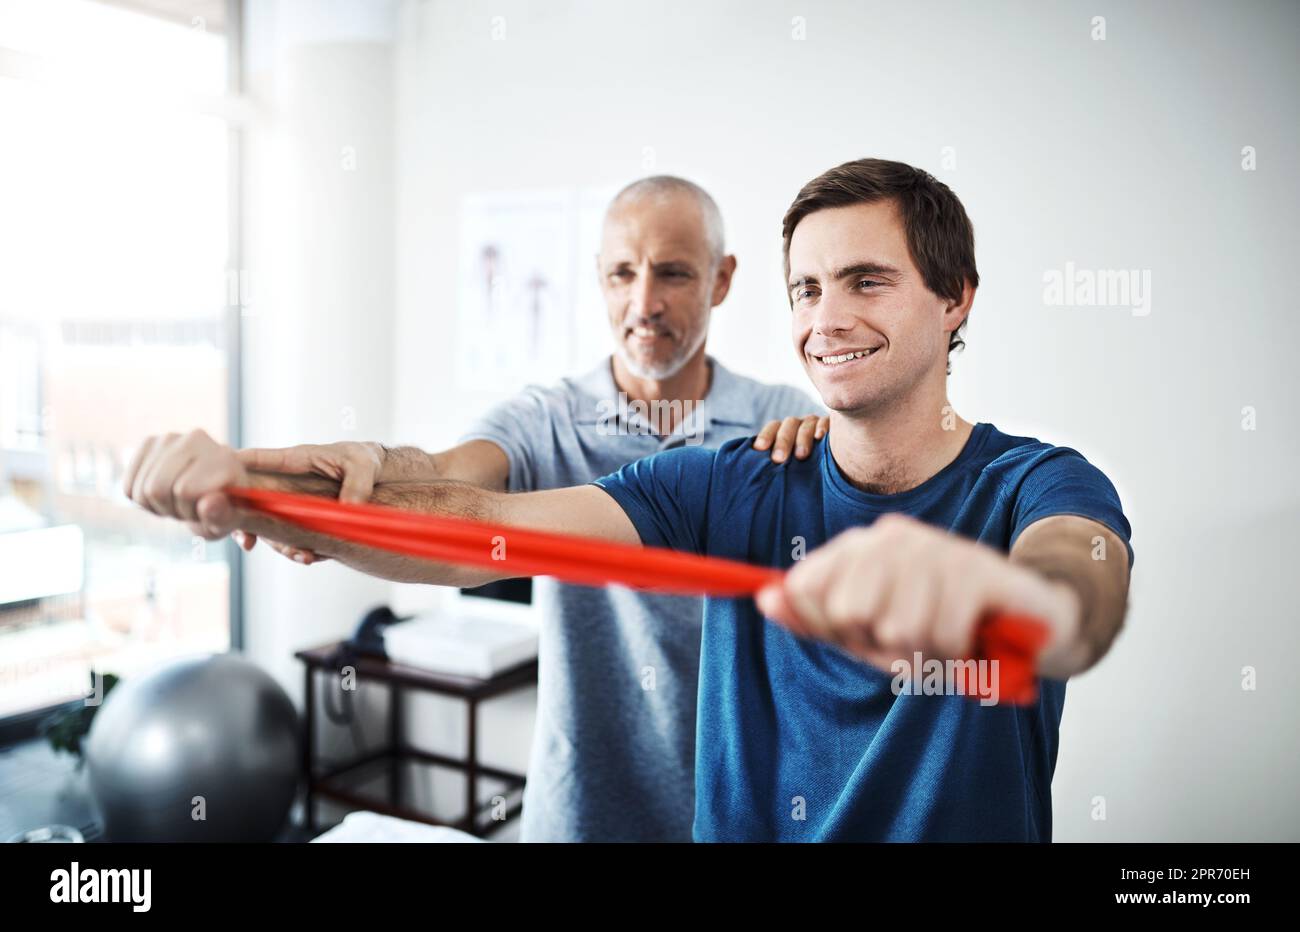 Keep your movements steady and slow. Shot of a physiotherapist helping a patient stretch with resistance bands. Stock Photo